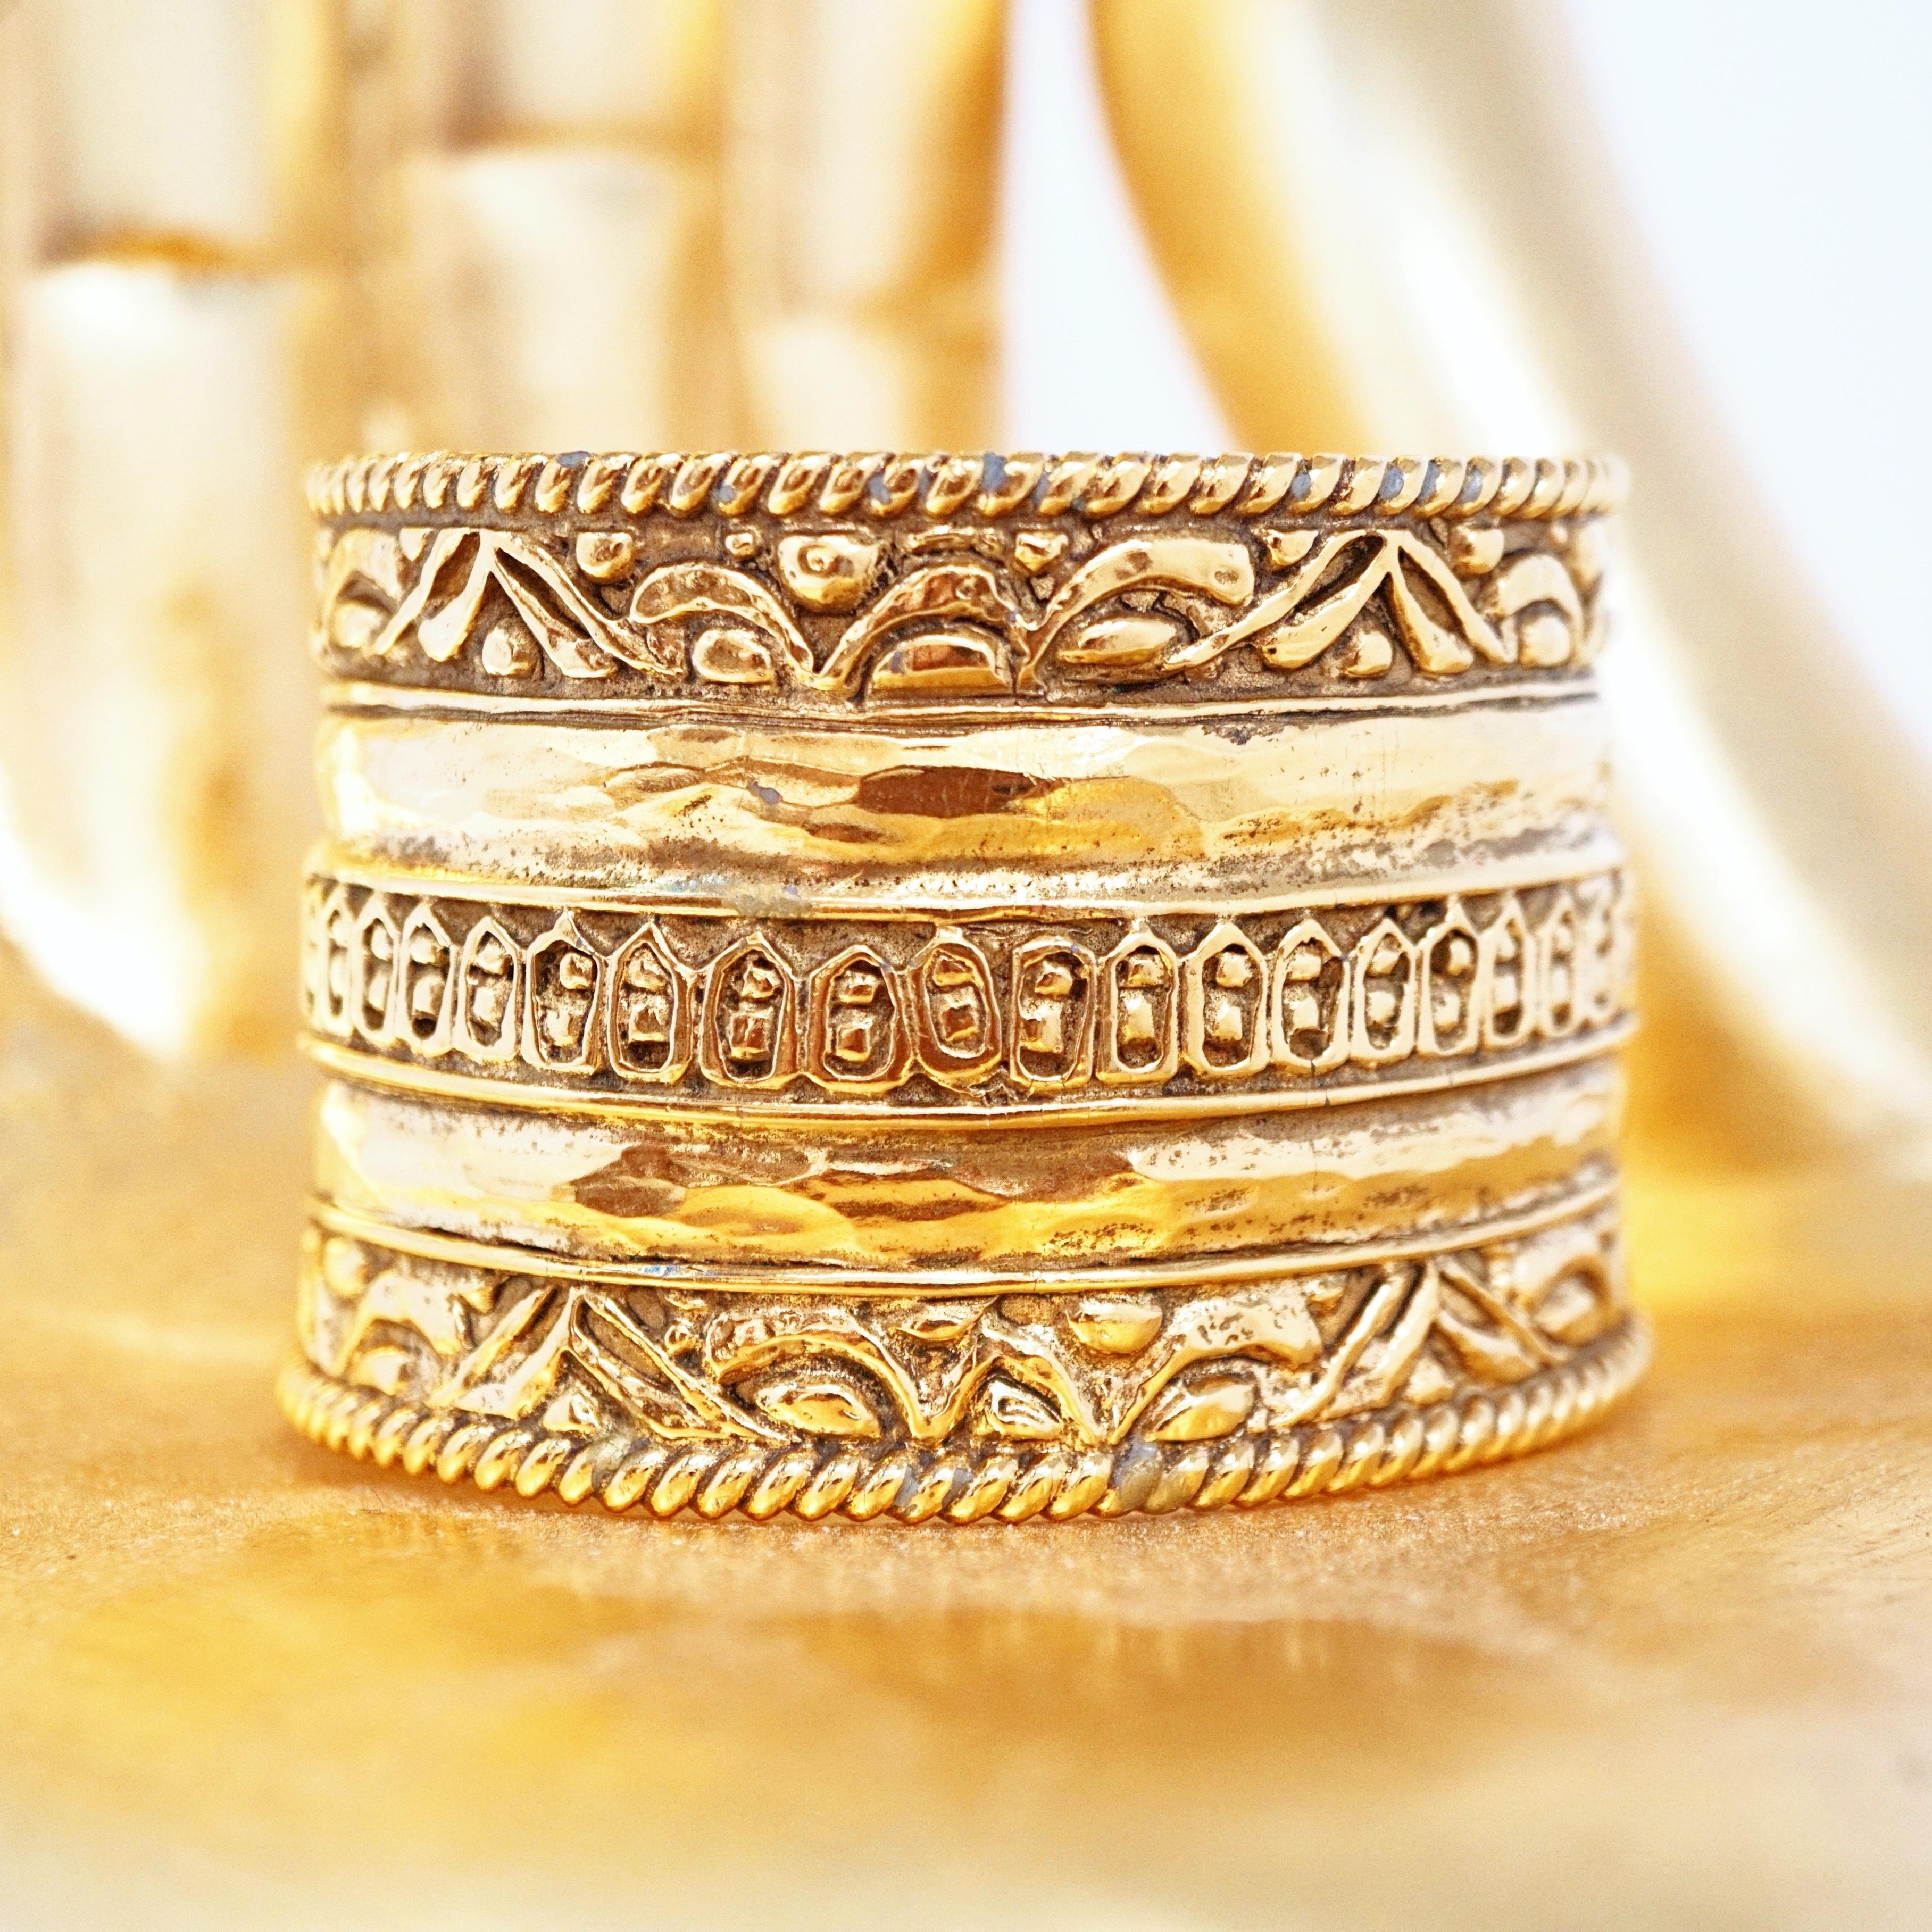 A rare, vintage, signed Chanel heavy gilt Etruscan cuff bracelet decorated with ornate detail. This cuff is slightly tapered which allows it to nestle beautifully on your lower wrist.

DETAILS:
- Signed 